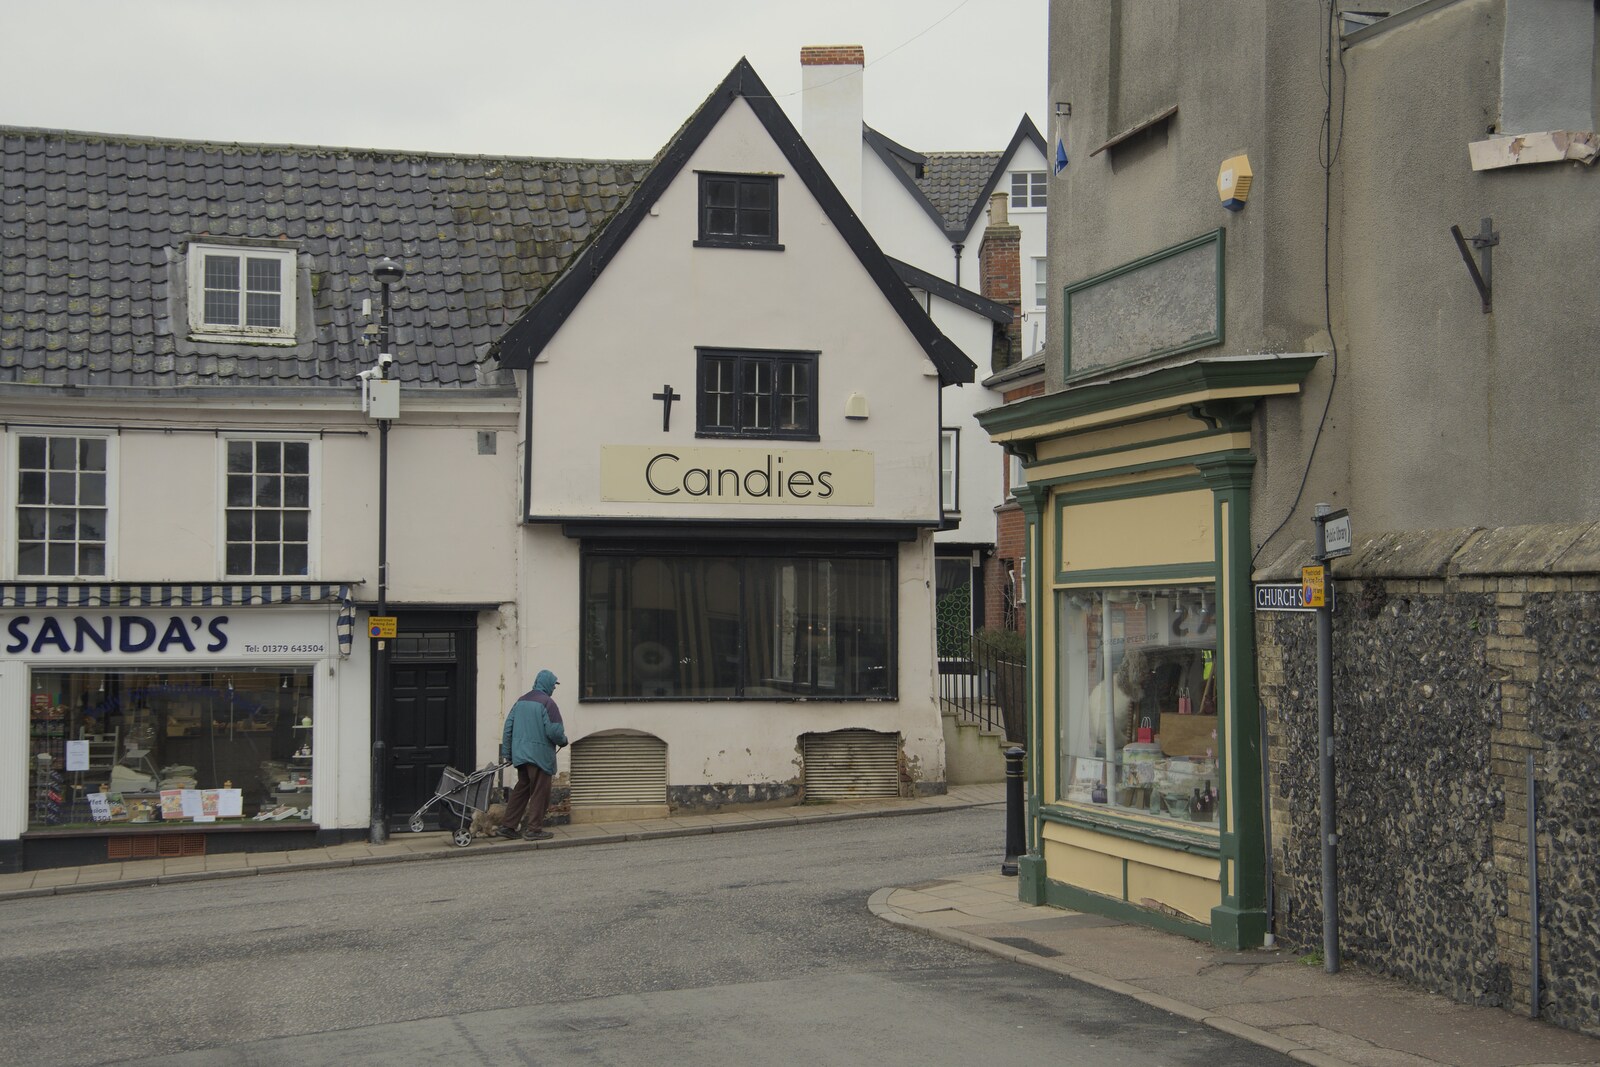 Sanda's and Candies on Market Place in Diss from A February Miscellany, Diss and Woodbridge, Suffolk - 3rd February 2024